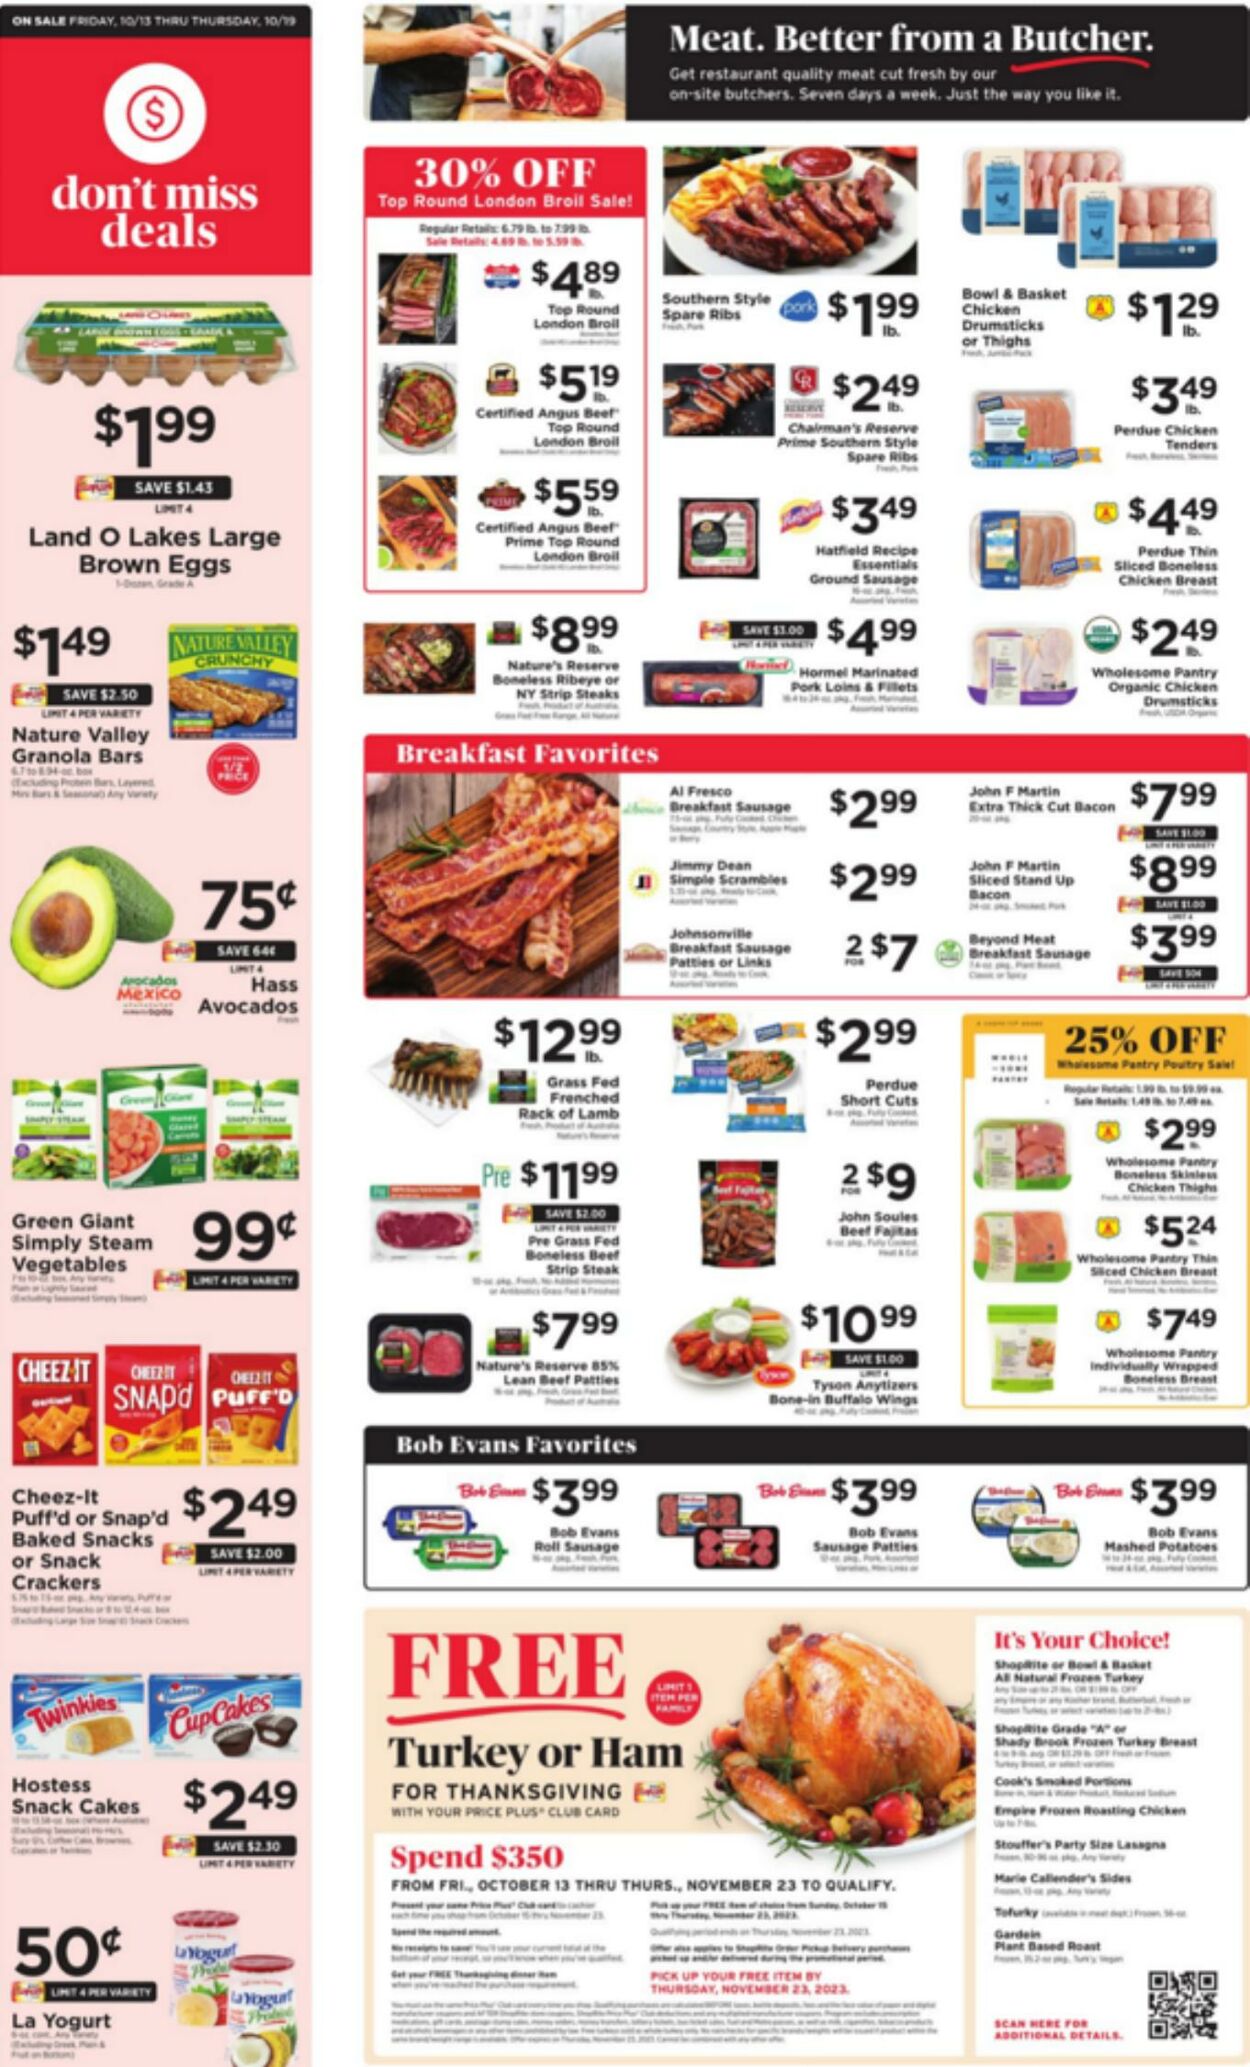 ShopRite Promotional Ad - Valid from 10/13 to 10/19 - Page nb 2 ...